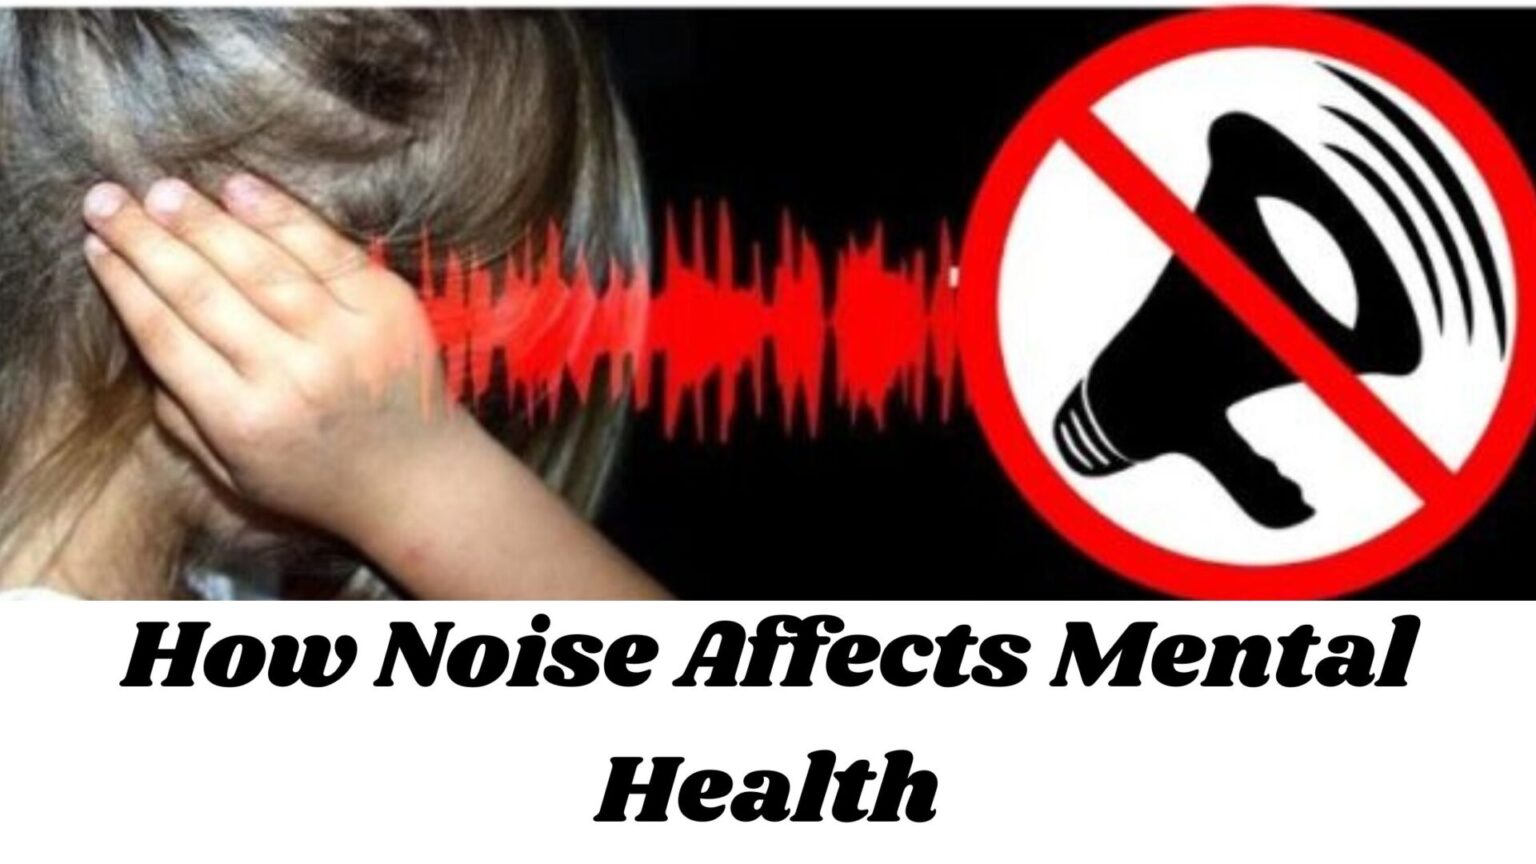 How Noise Affects Mental Health